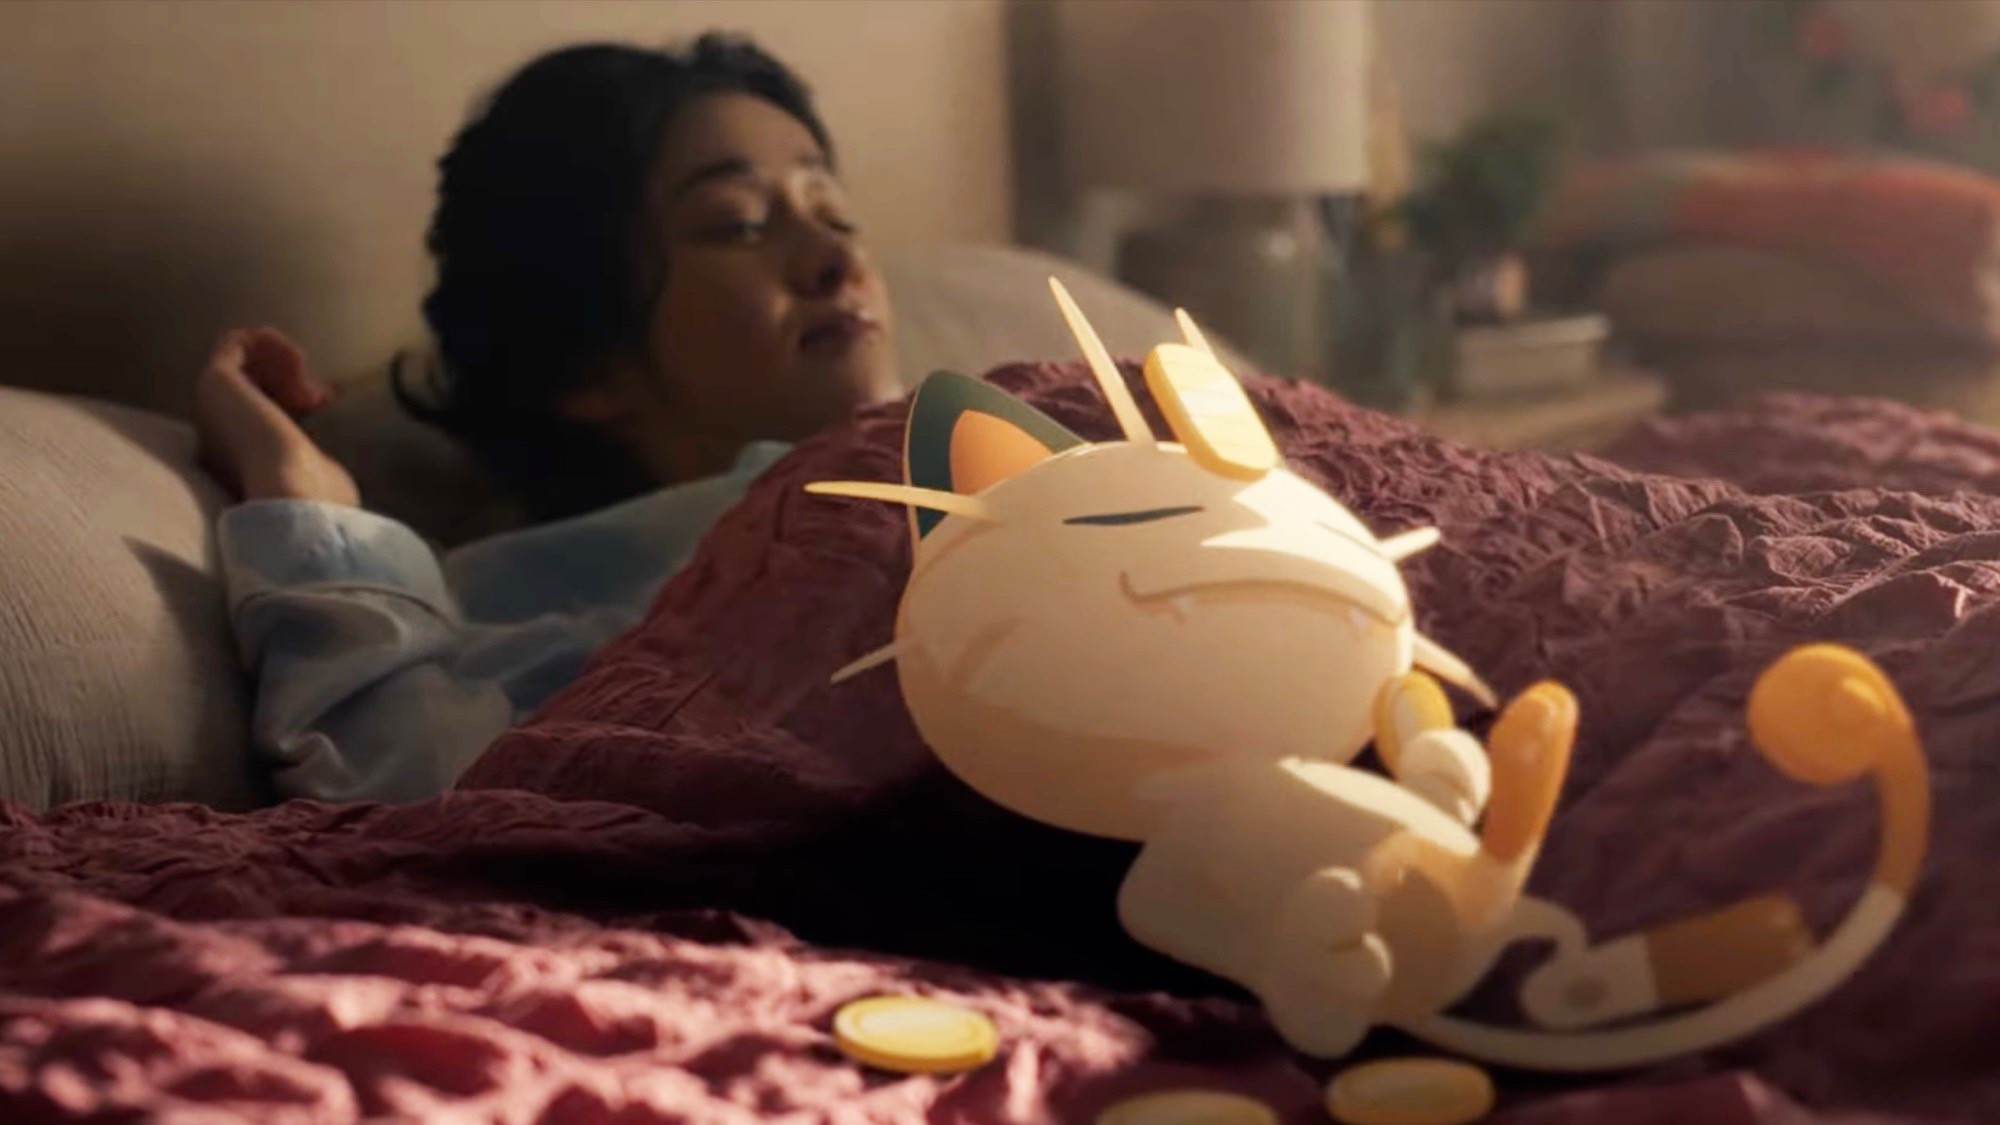 Keep an eye out for an opportunity to pre-register for Pokemon Sleep on iOS.